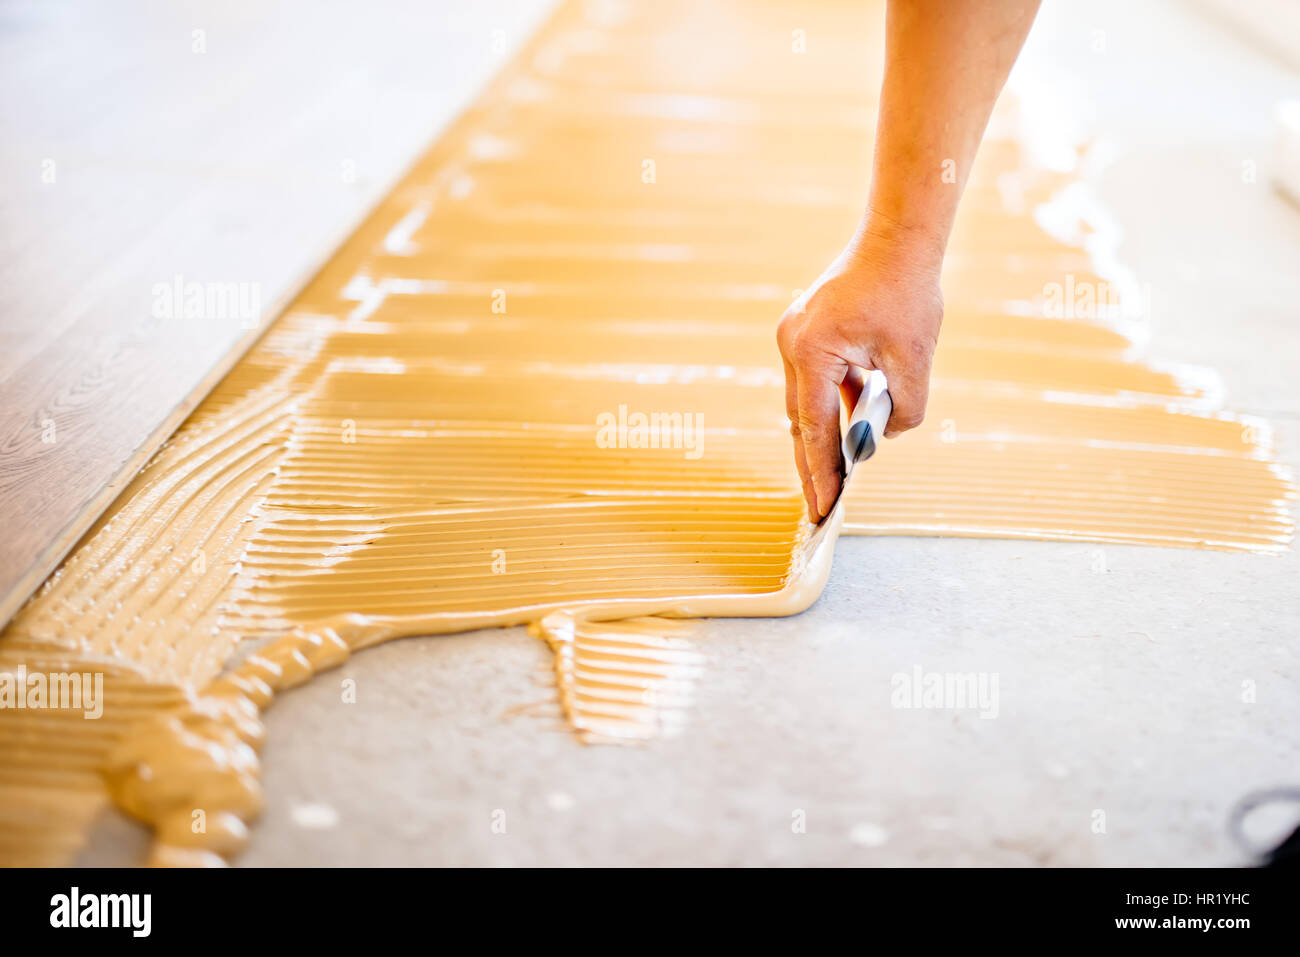 close-up of hand of worker adding glue during parquet installation Stock Photo